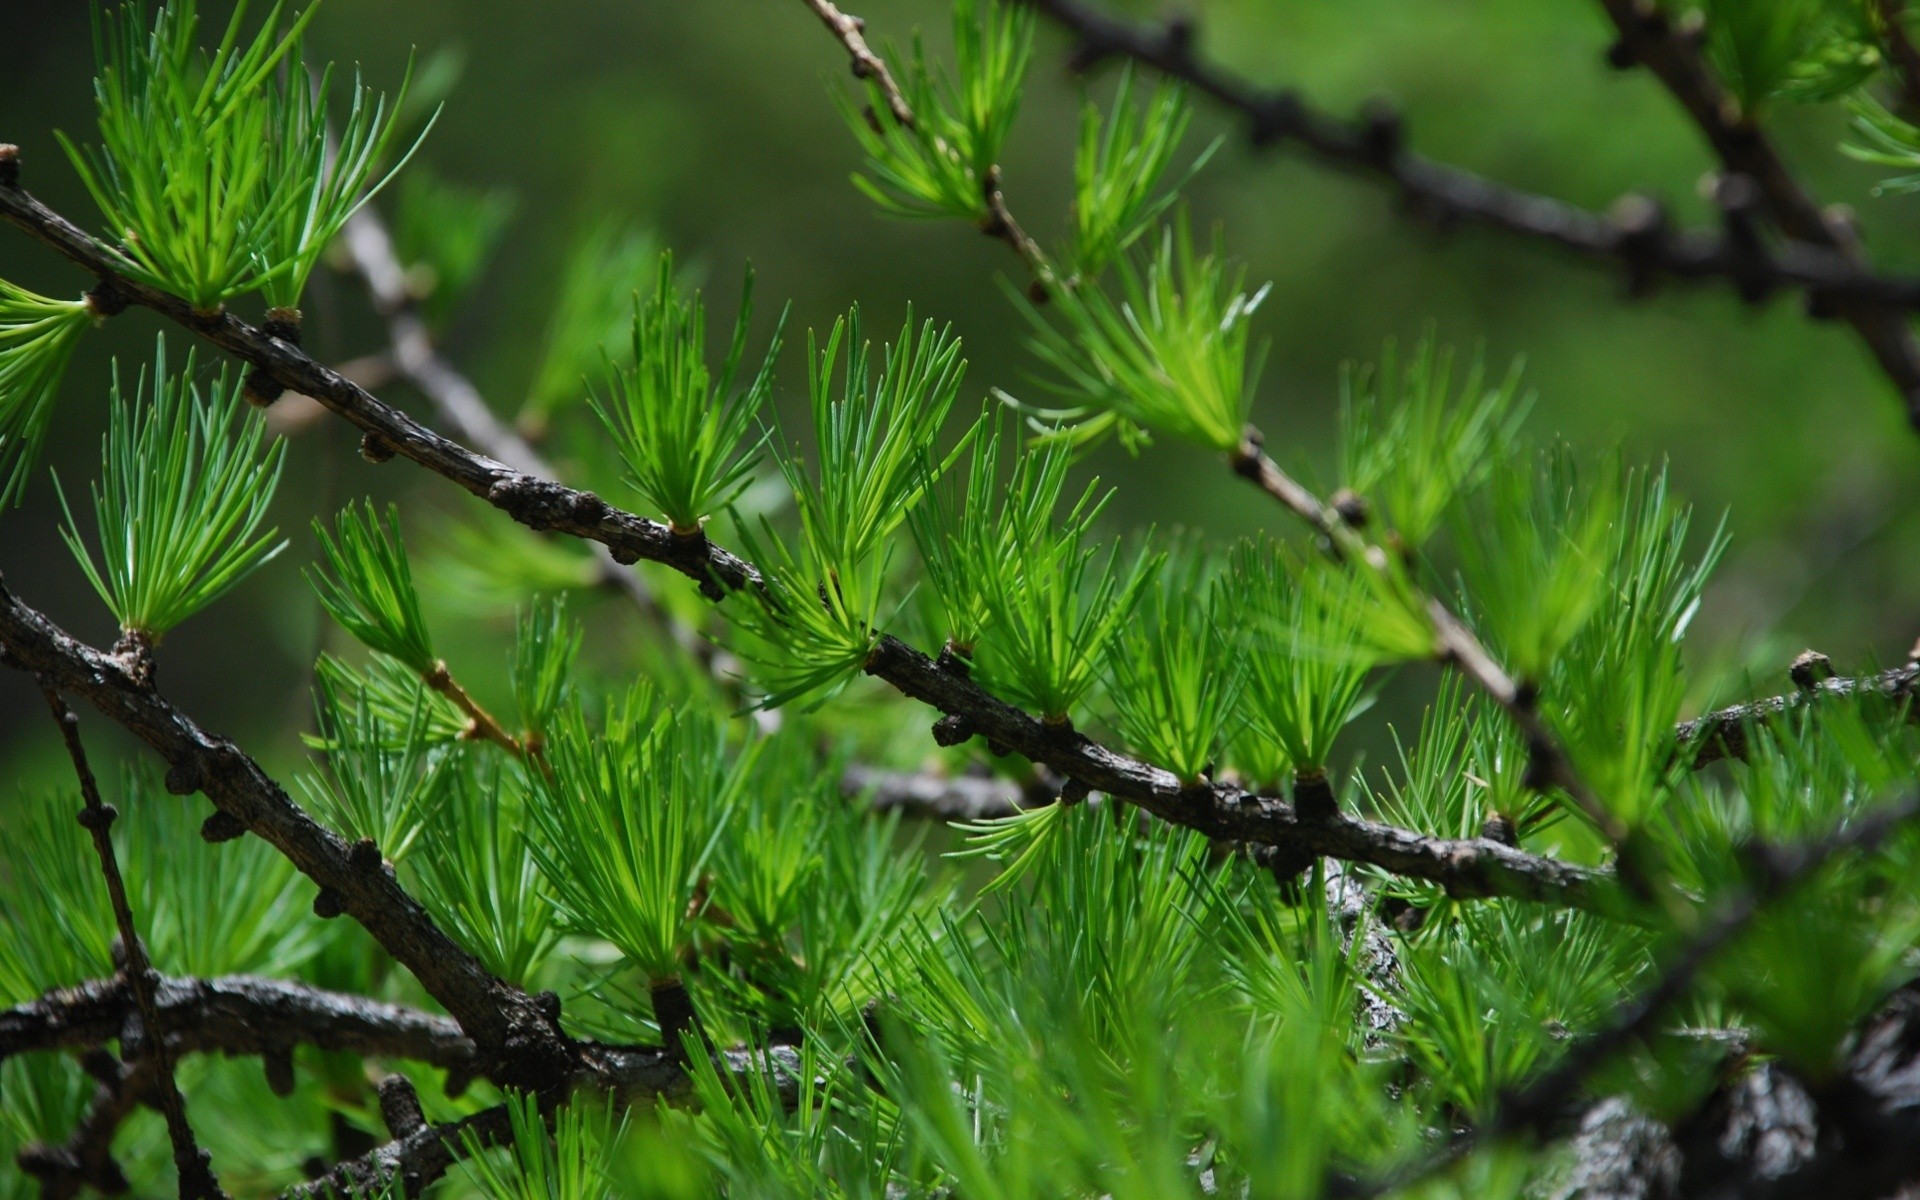 Wallpapers trees forest depth of field on the desktop